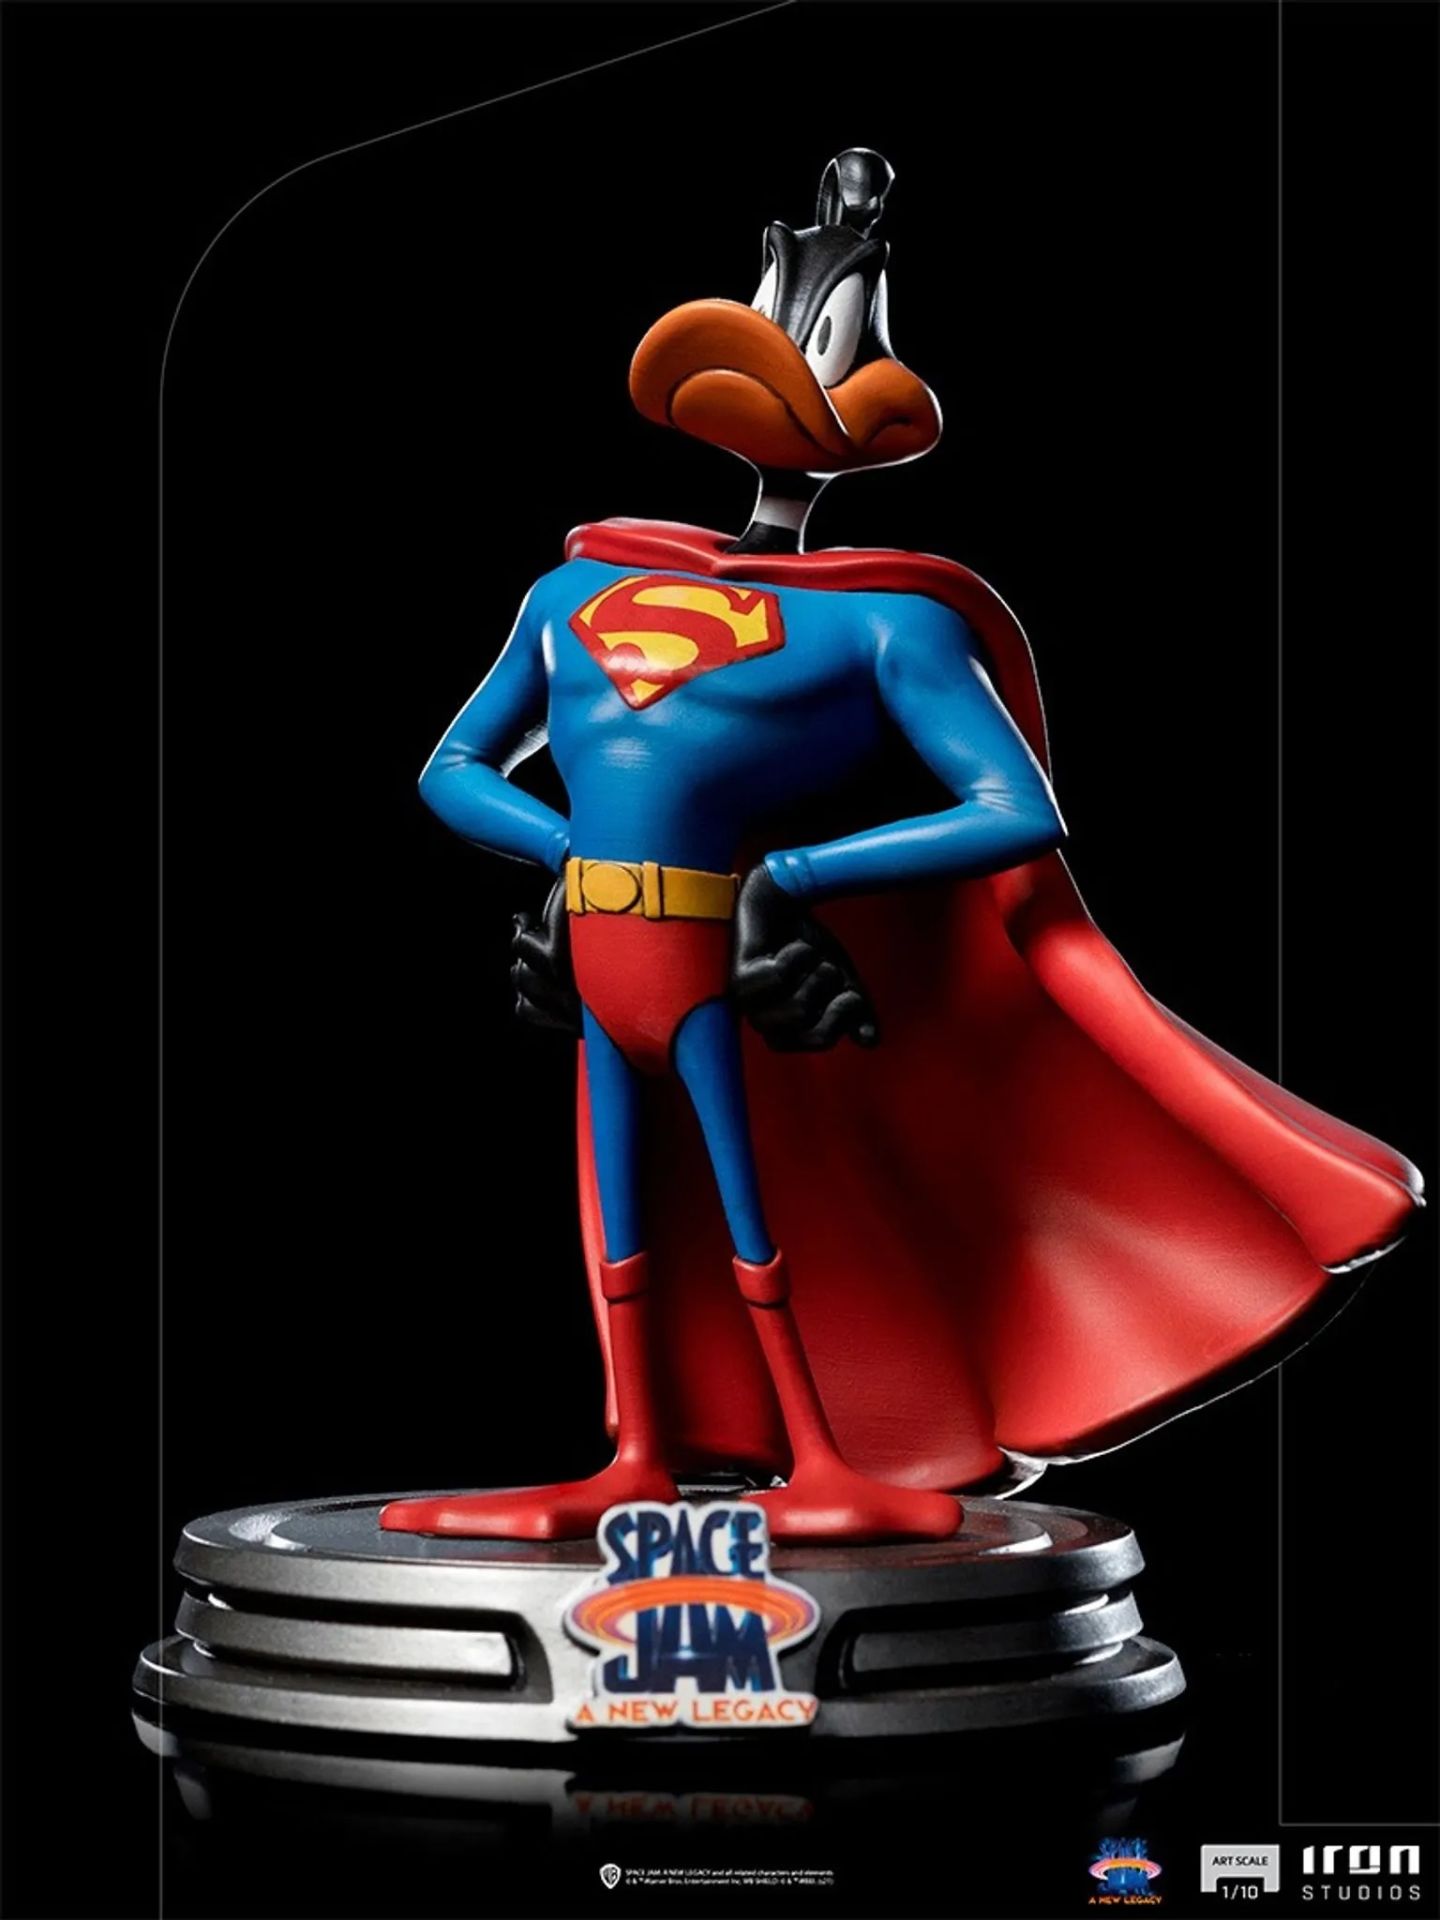 Space Jam: A New Legacy - Superman Daffy Duck 1/10 Art Scale Limited Edition Heykel